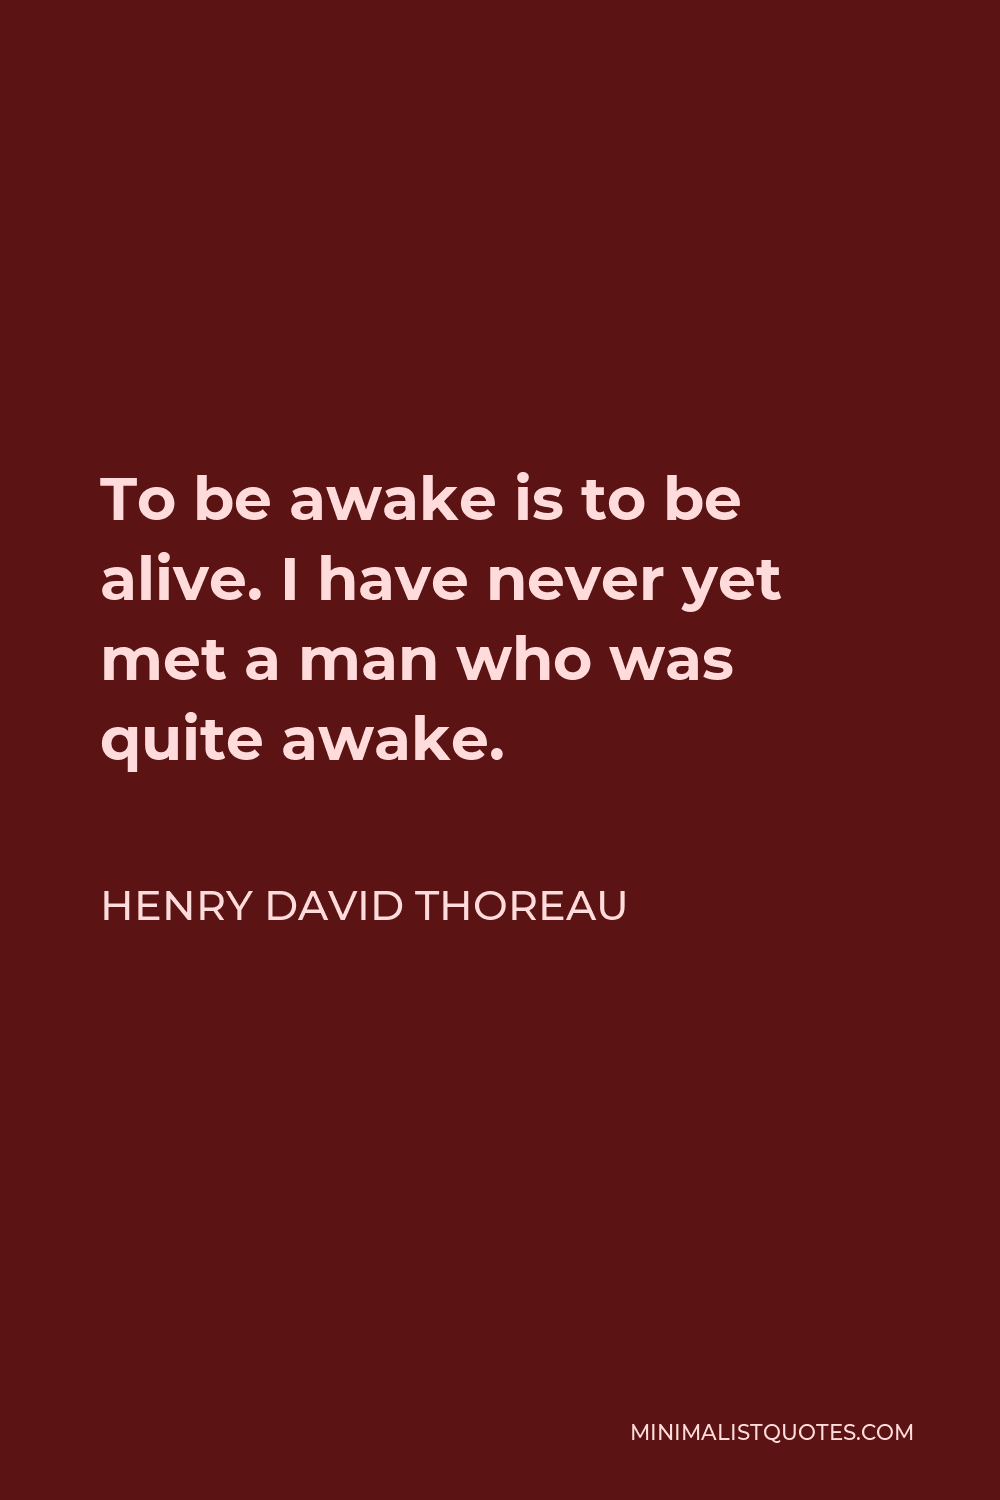 Henry David Thoreau Quote - To be awake is to be alive. I have never yet met a man who was quite awake.